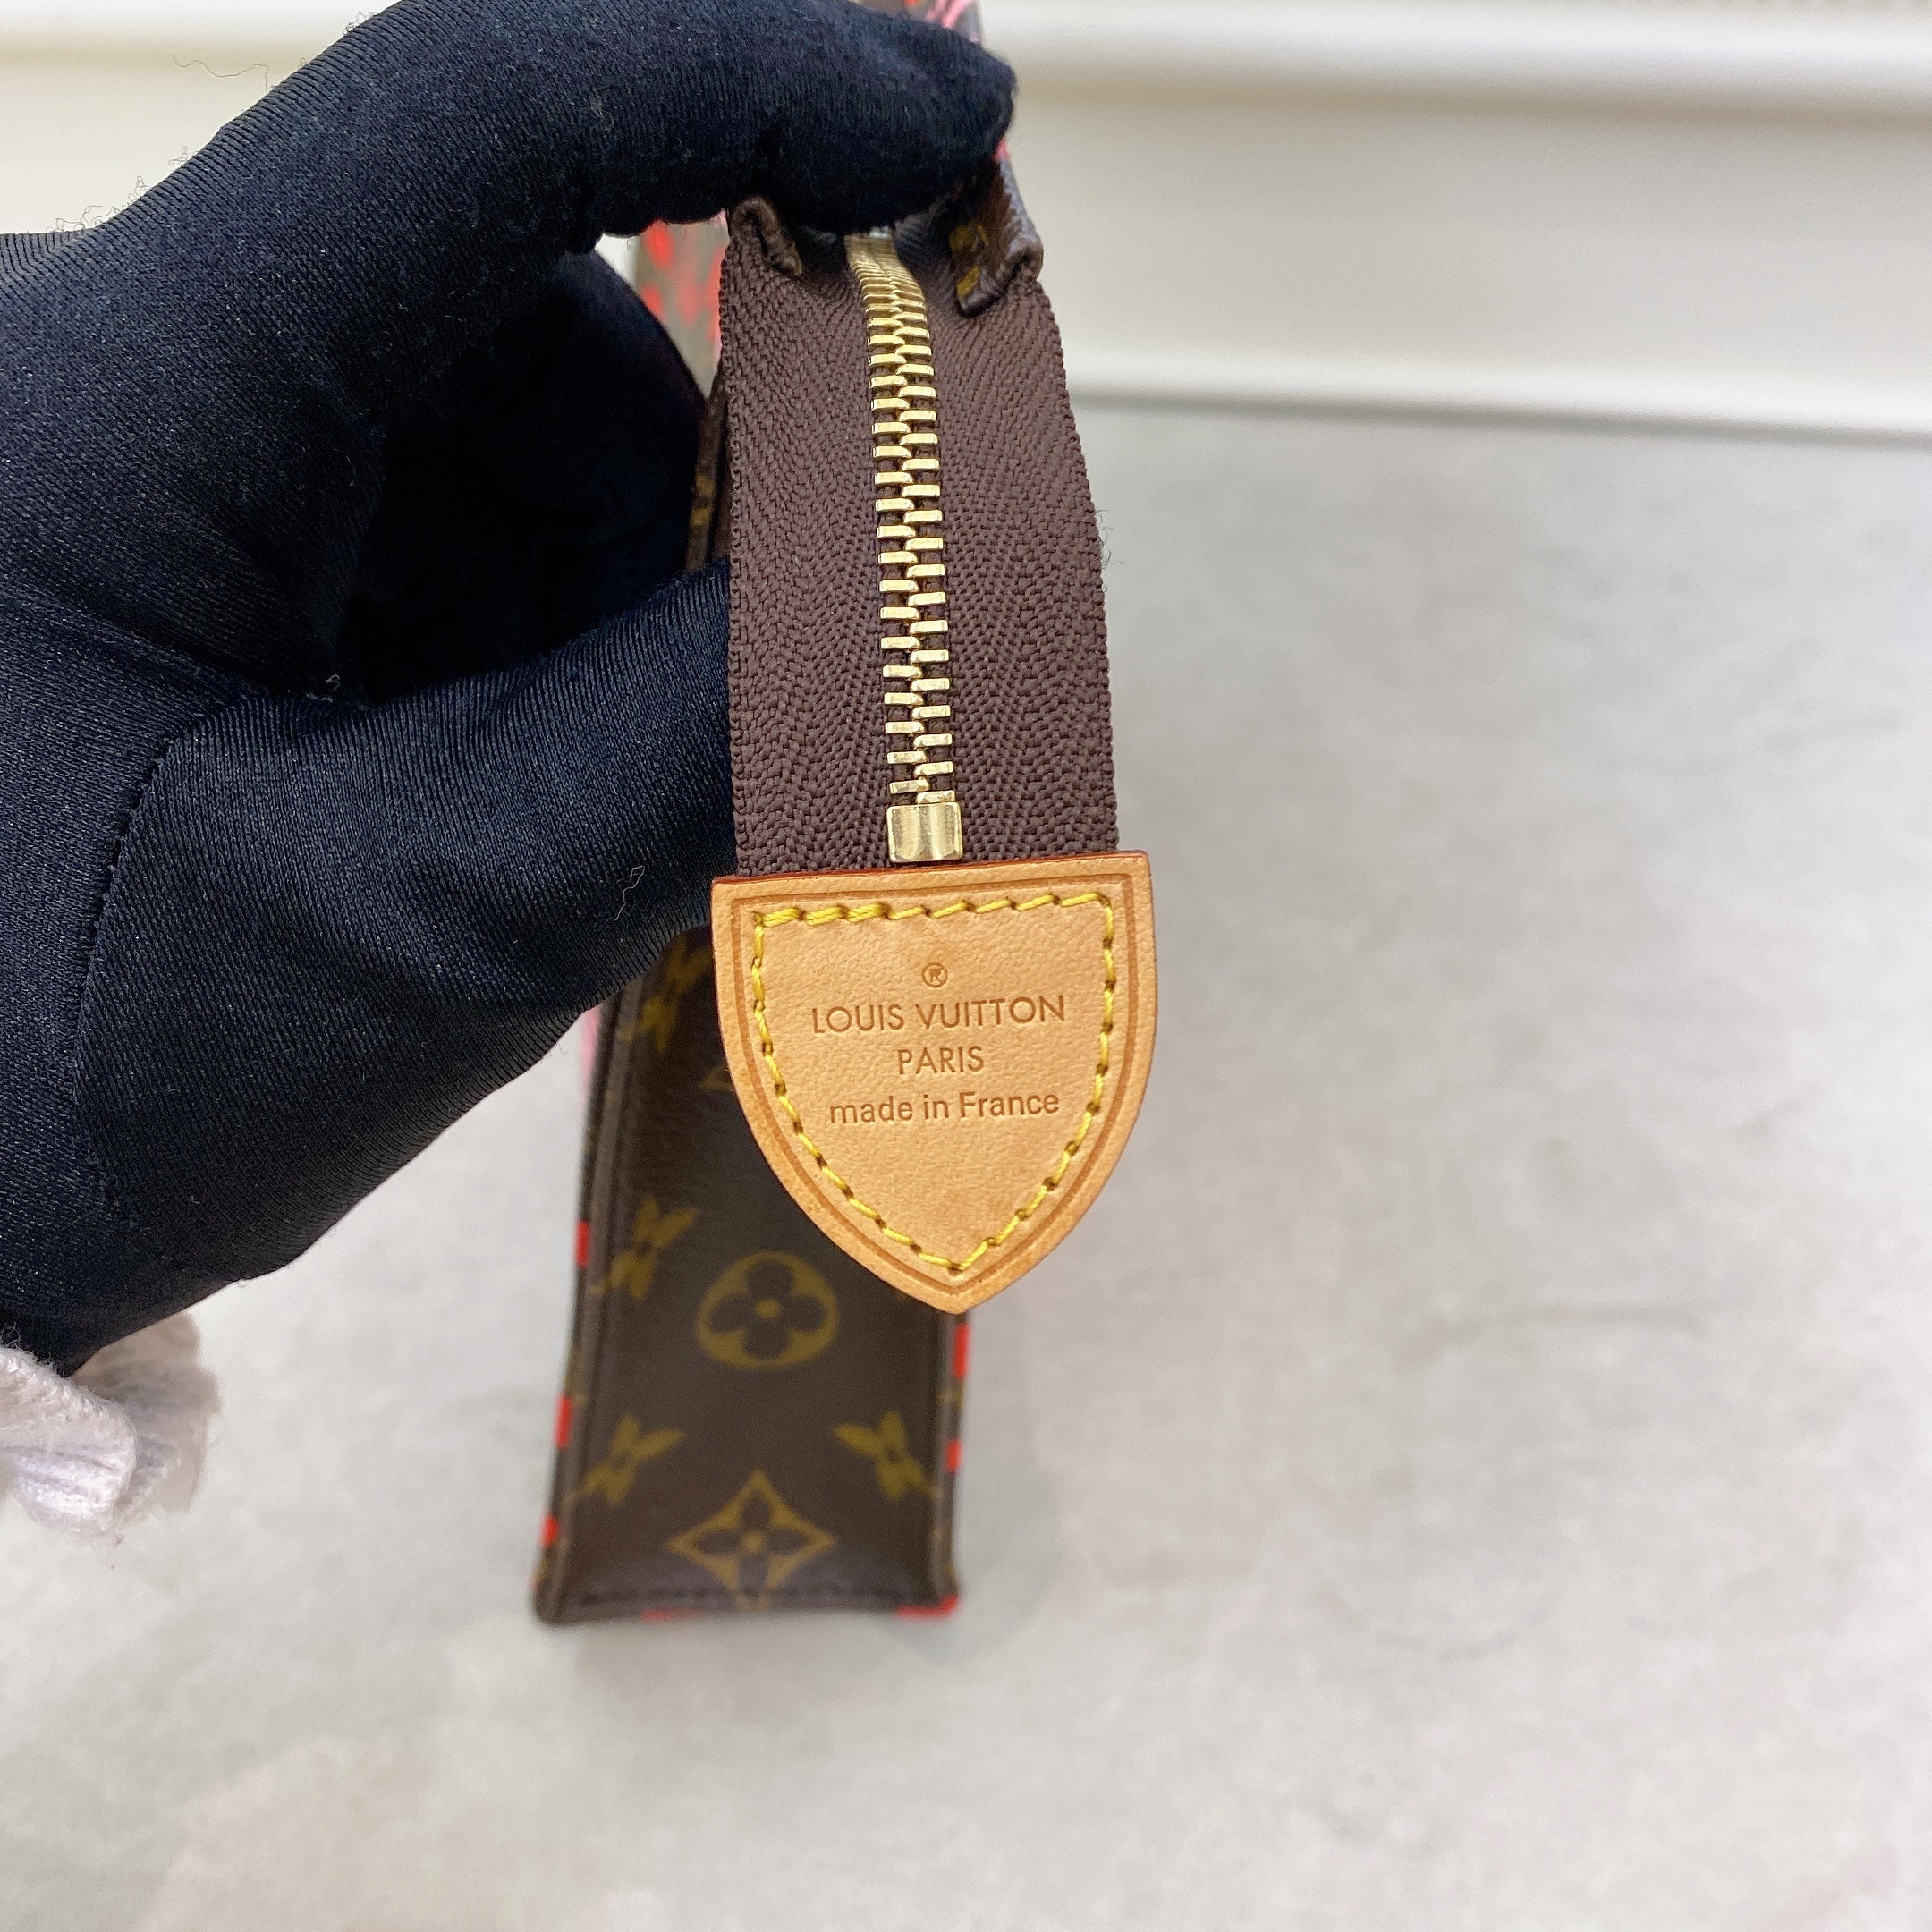 LV Monogram Limited Edition Toiletry 26